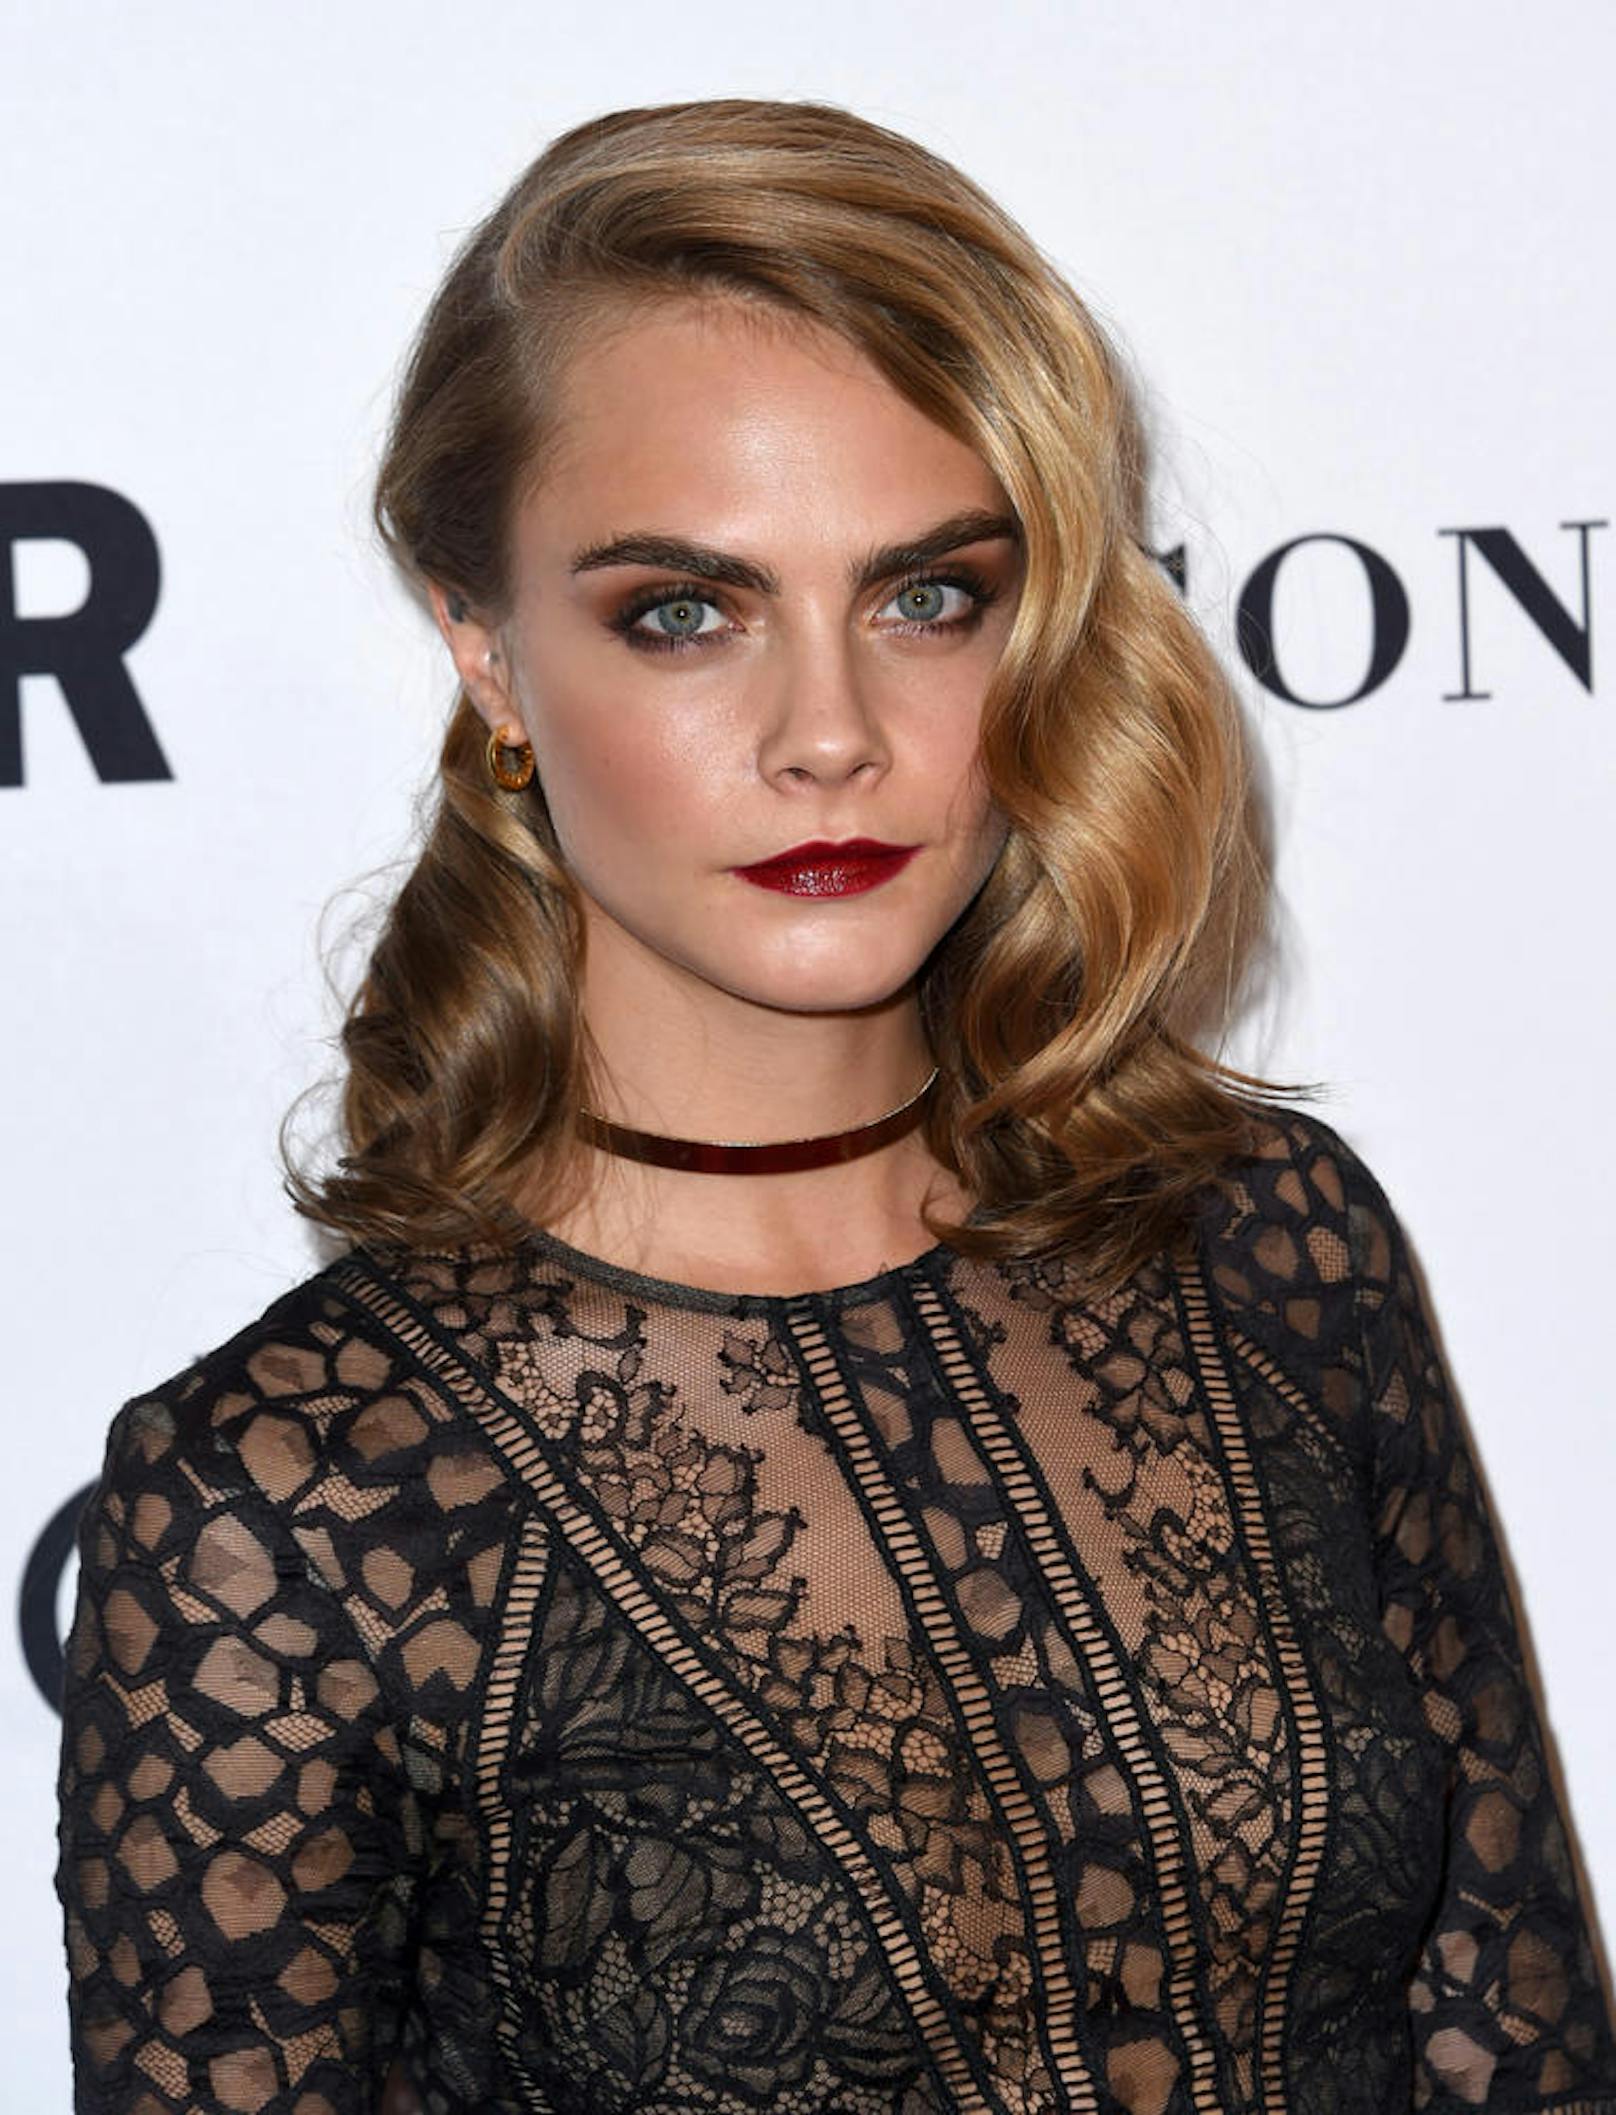 Cara Delevingne bei den "Glamour: Women of the Year Awards" 2016